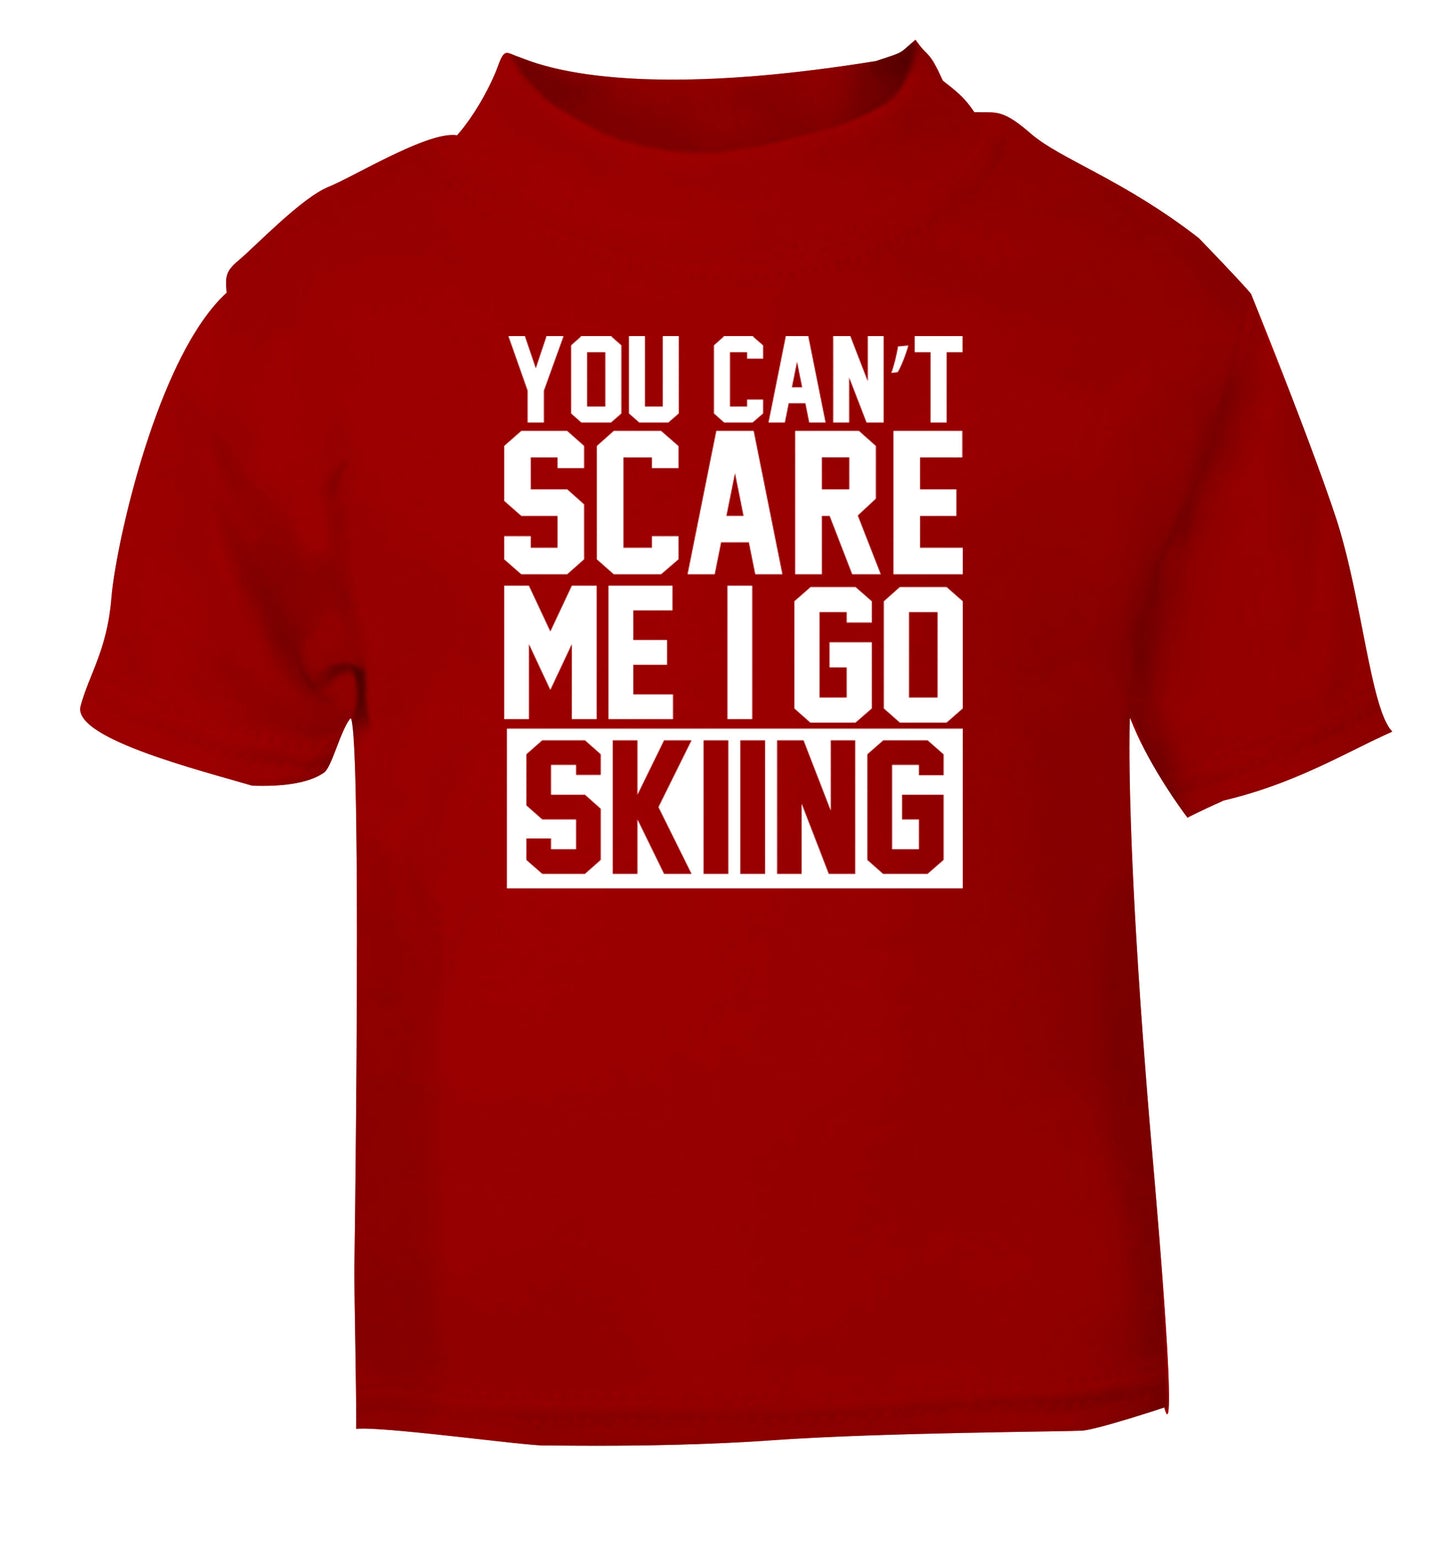 You can't scare me I go skiing red Baby Toddler Tshirt 2 Years